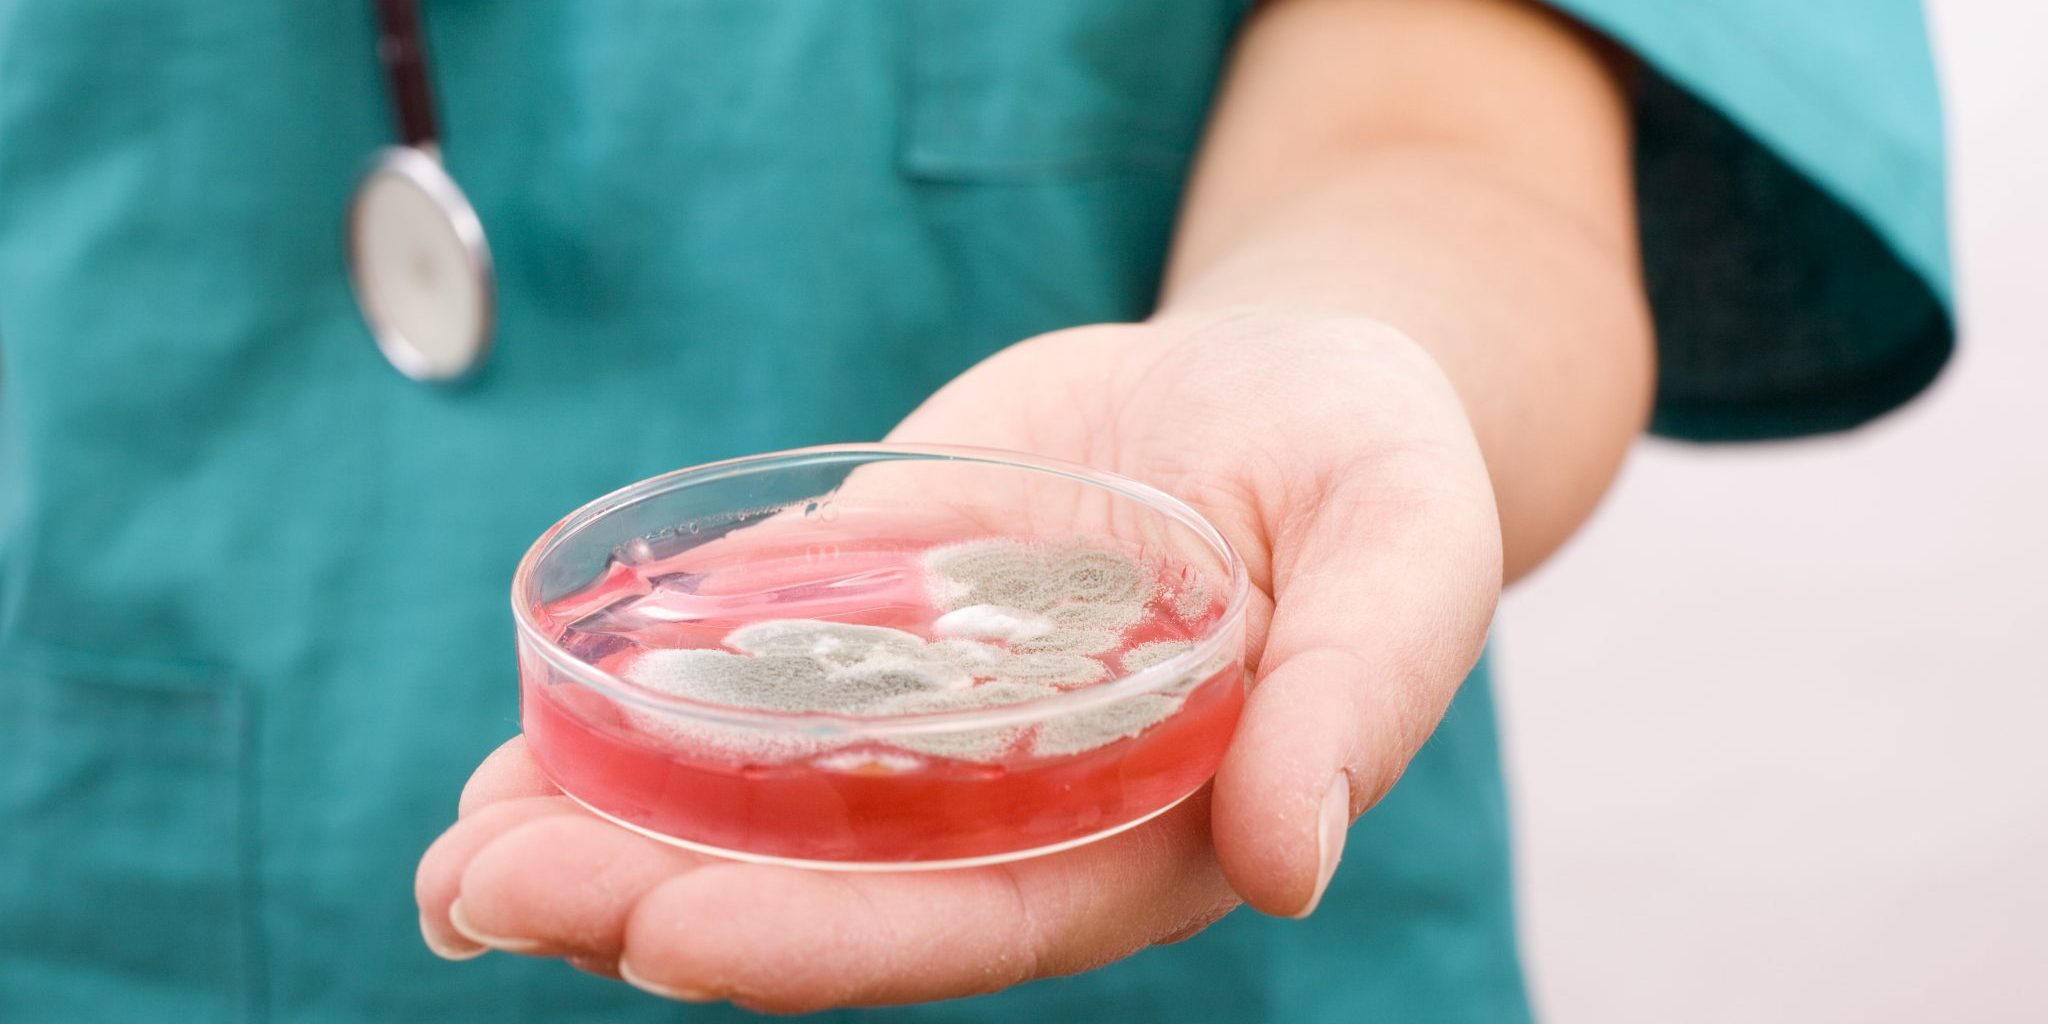 A close-up of a person wearing a nursing suit holding a Petri dish with red fluid and mould build-up.